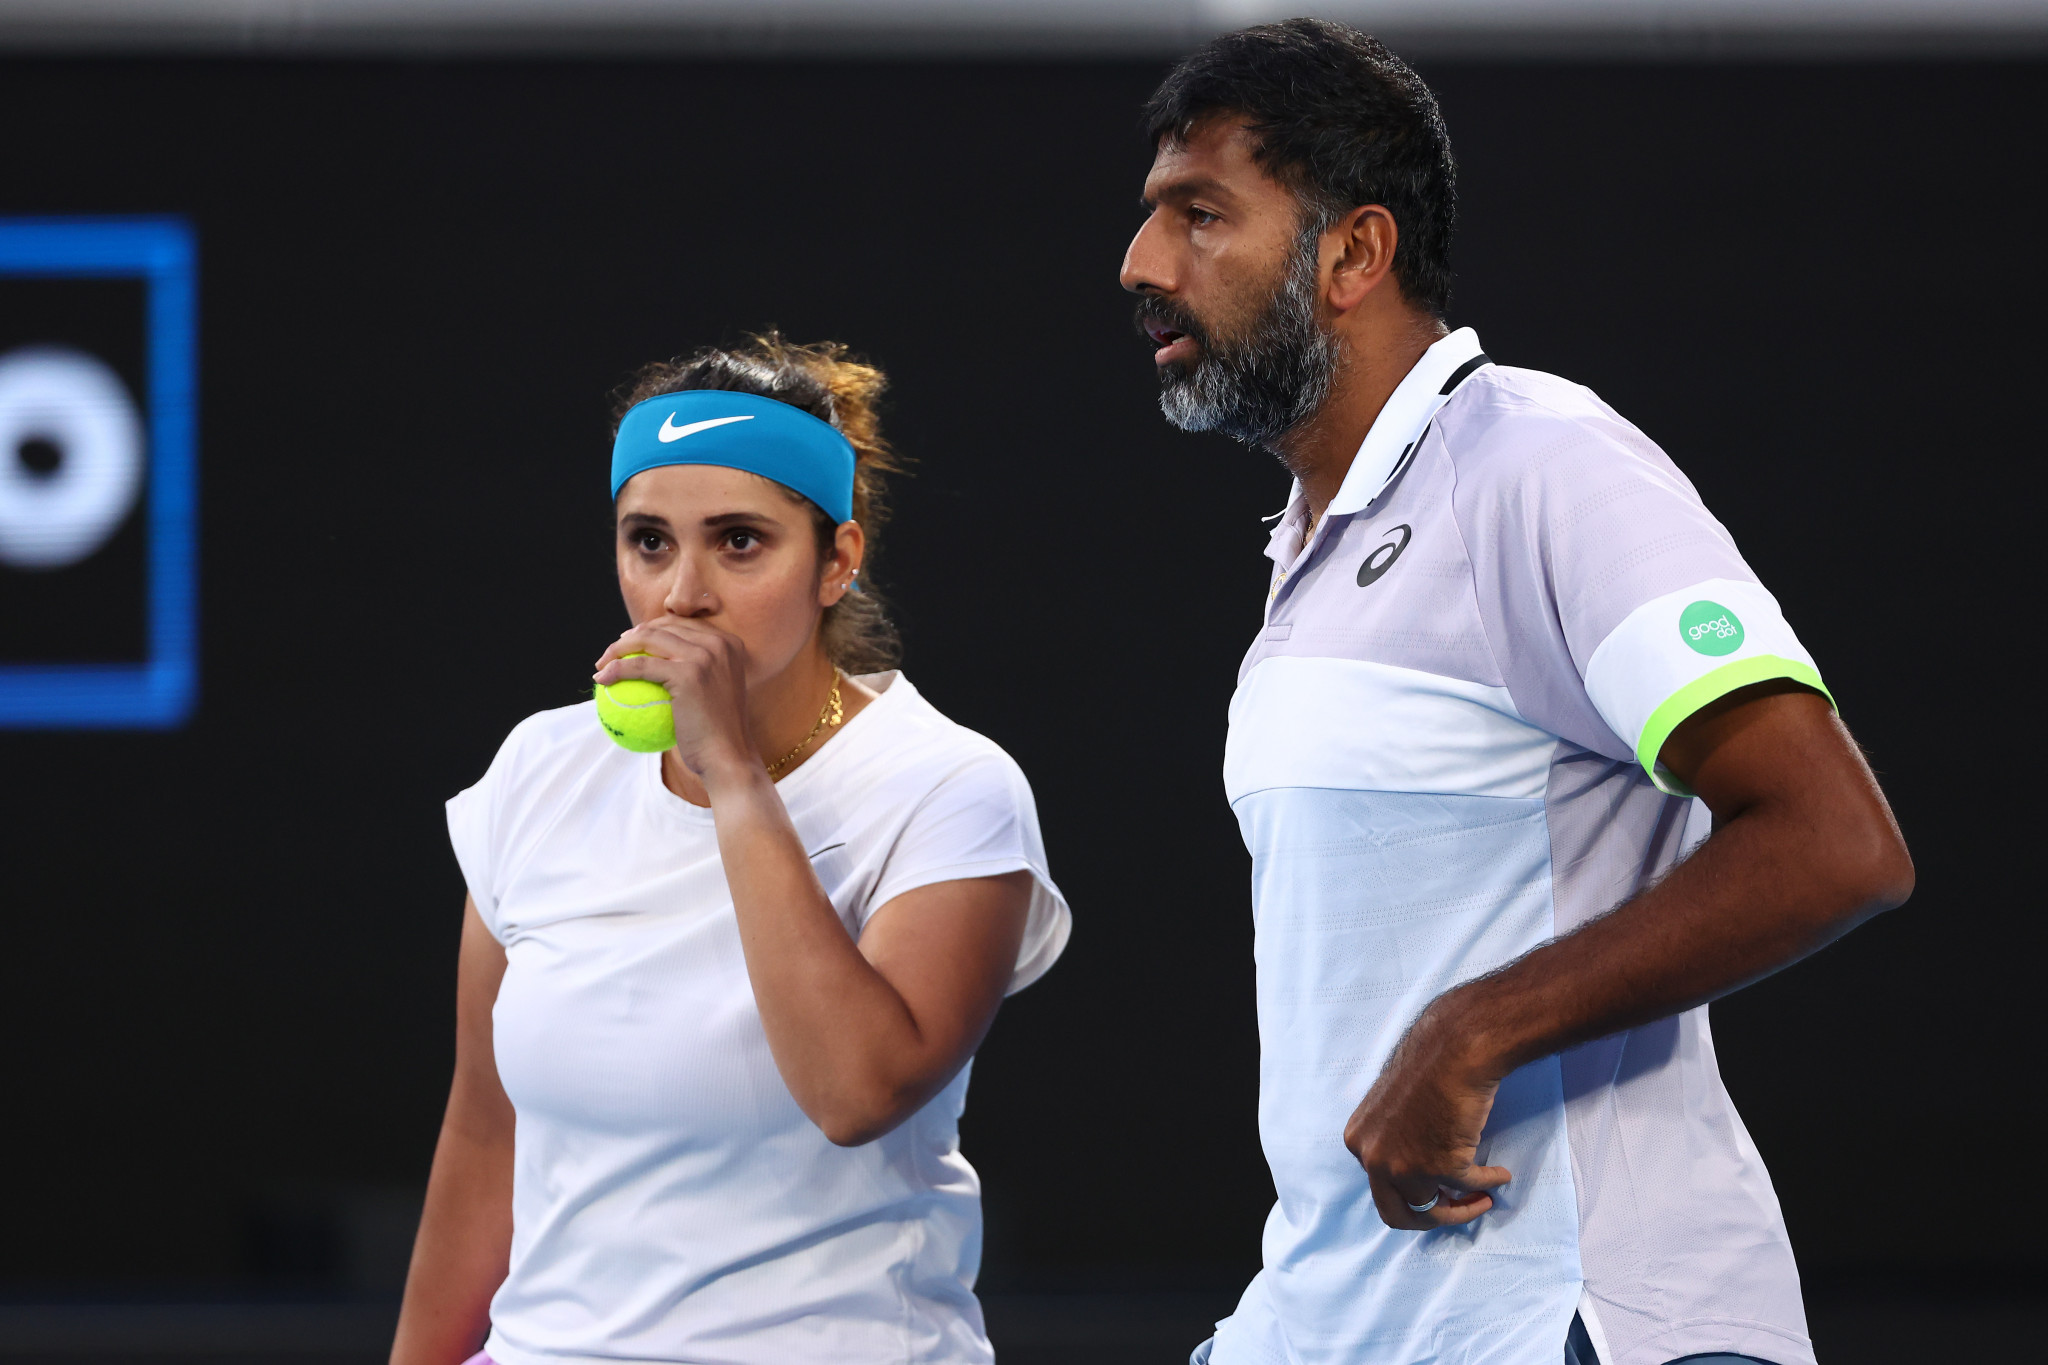 Sania Mirza, left, retired from Grand Slam tennis following the Australian Open mixed doubles final, where her and partner Rohan Bopanna were defeated ©Getty Images